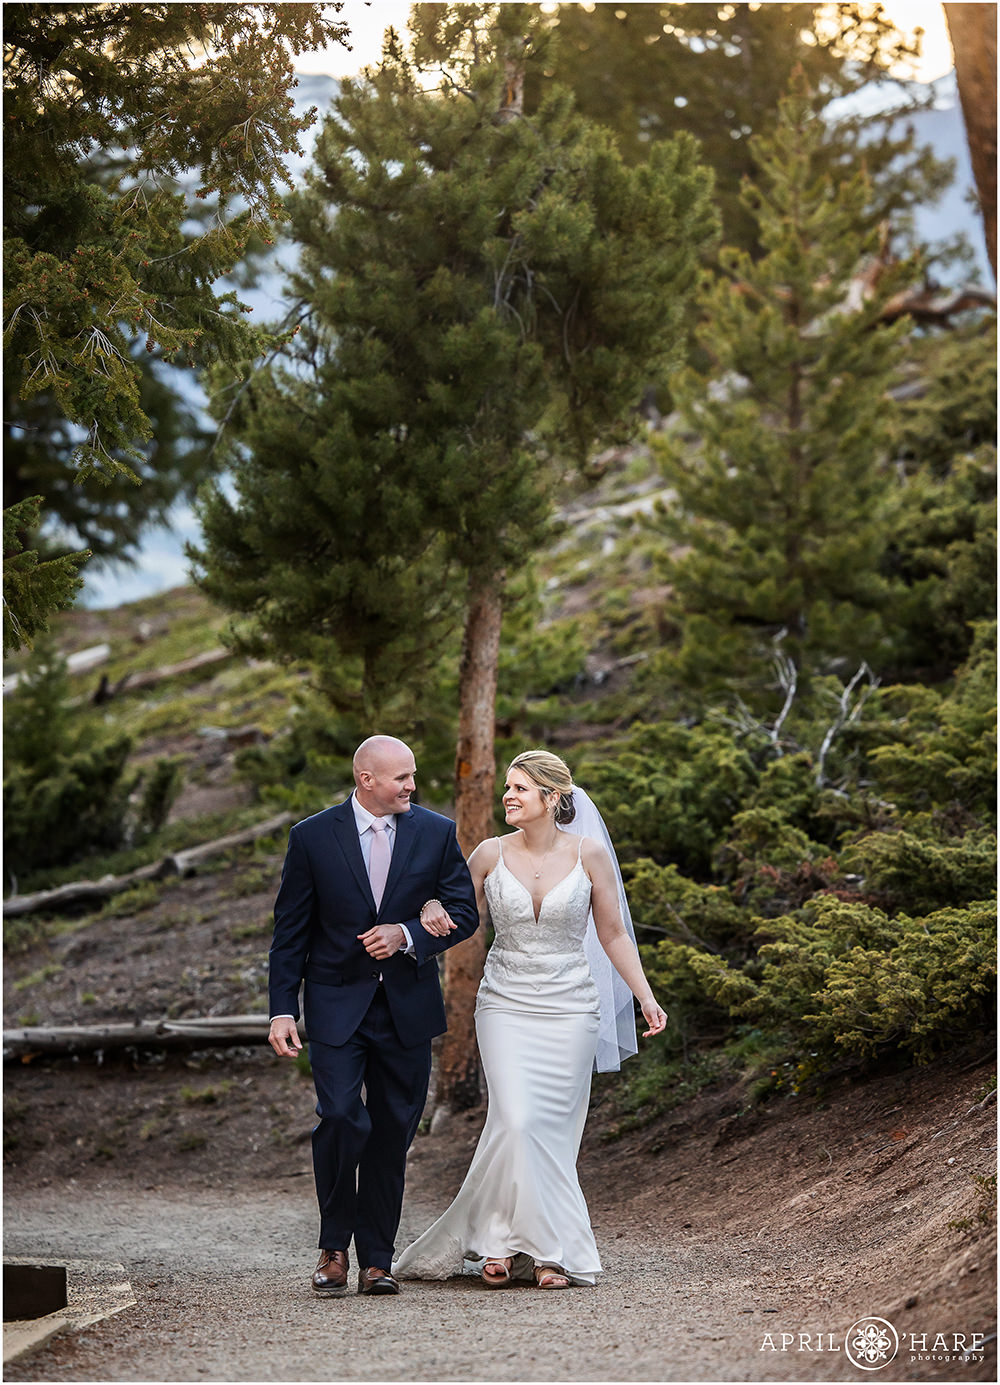 Couple walk up the path way surrounded by evergreen trees at Sapphire Point in Colorado